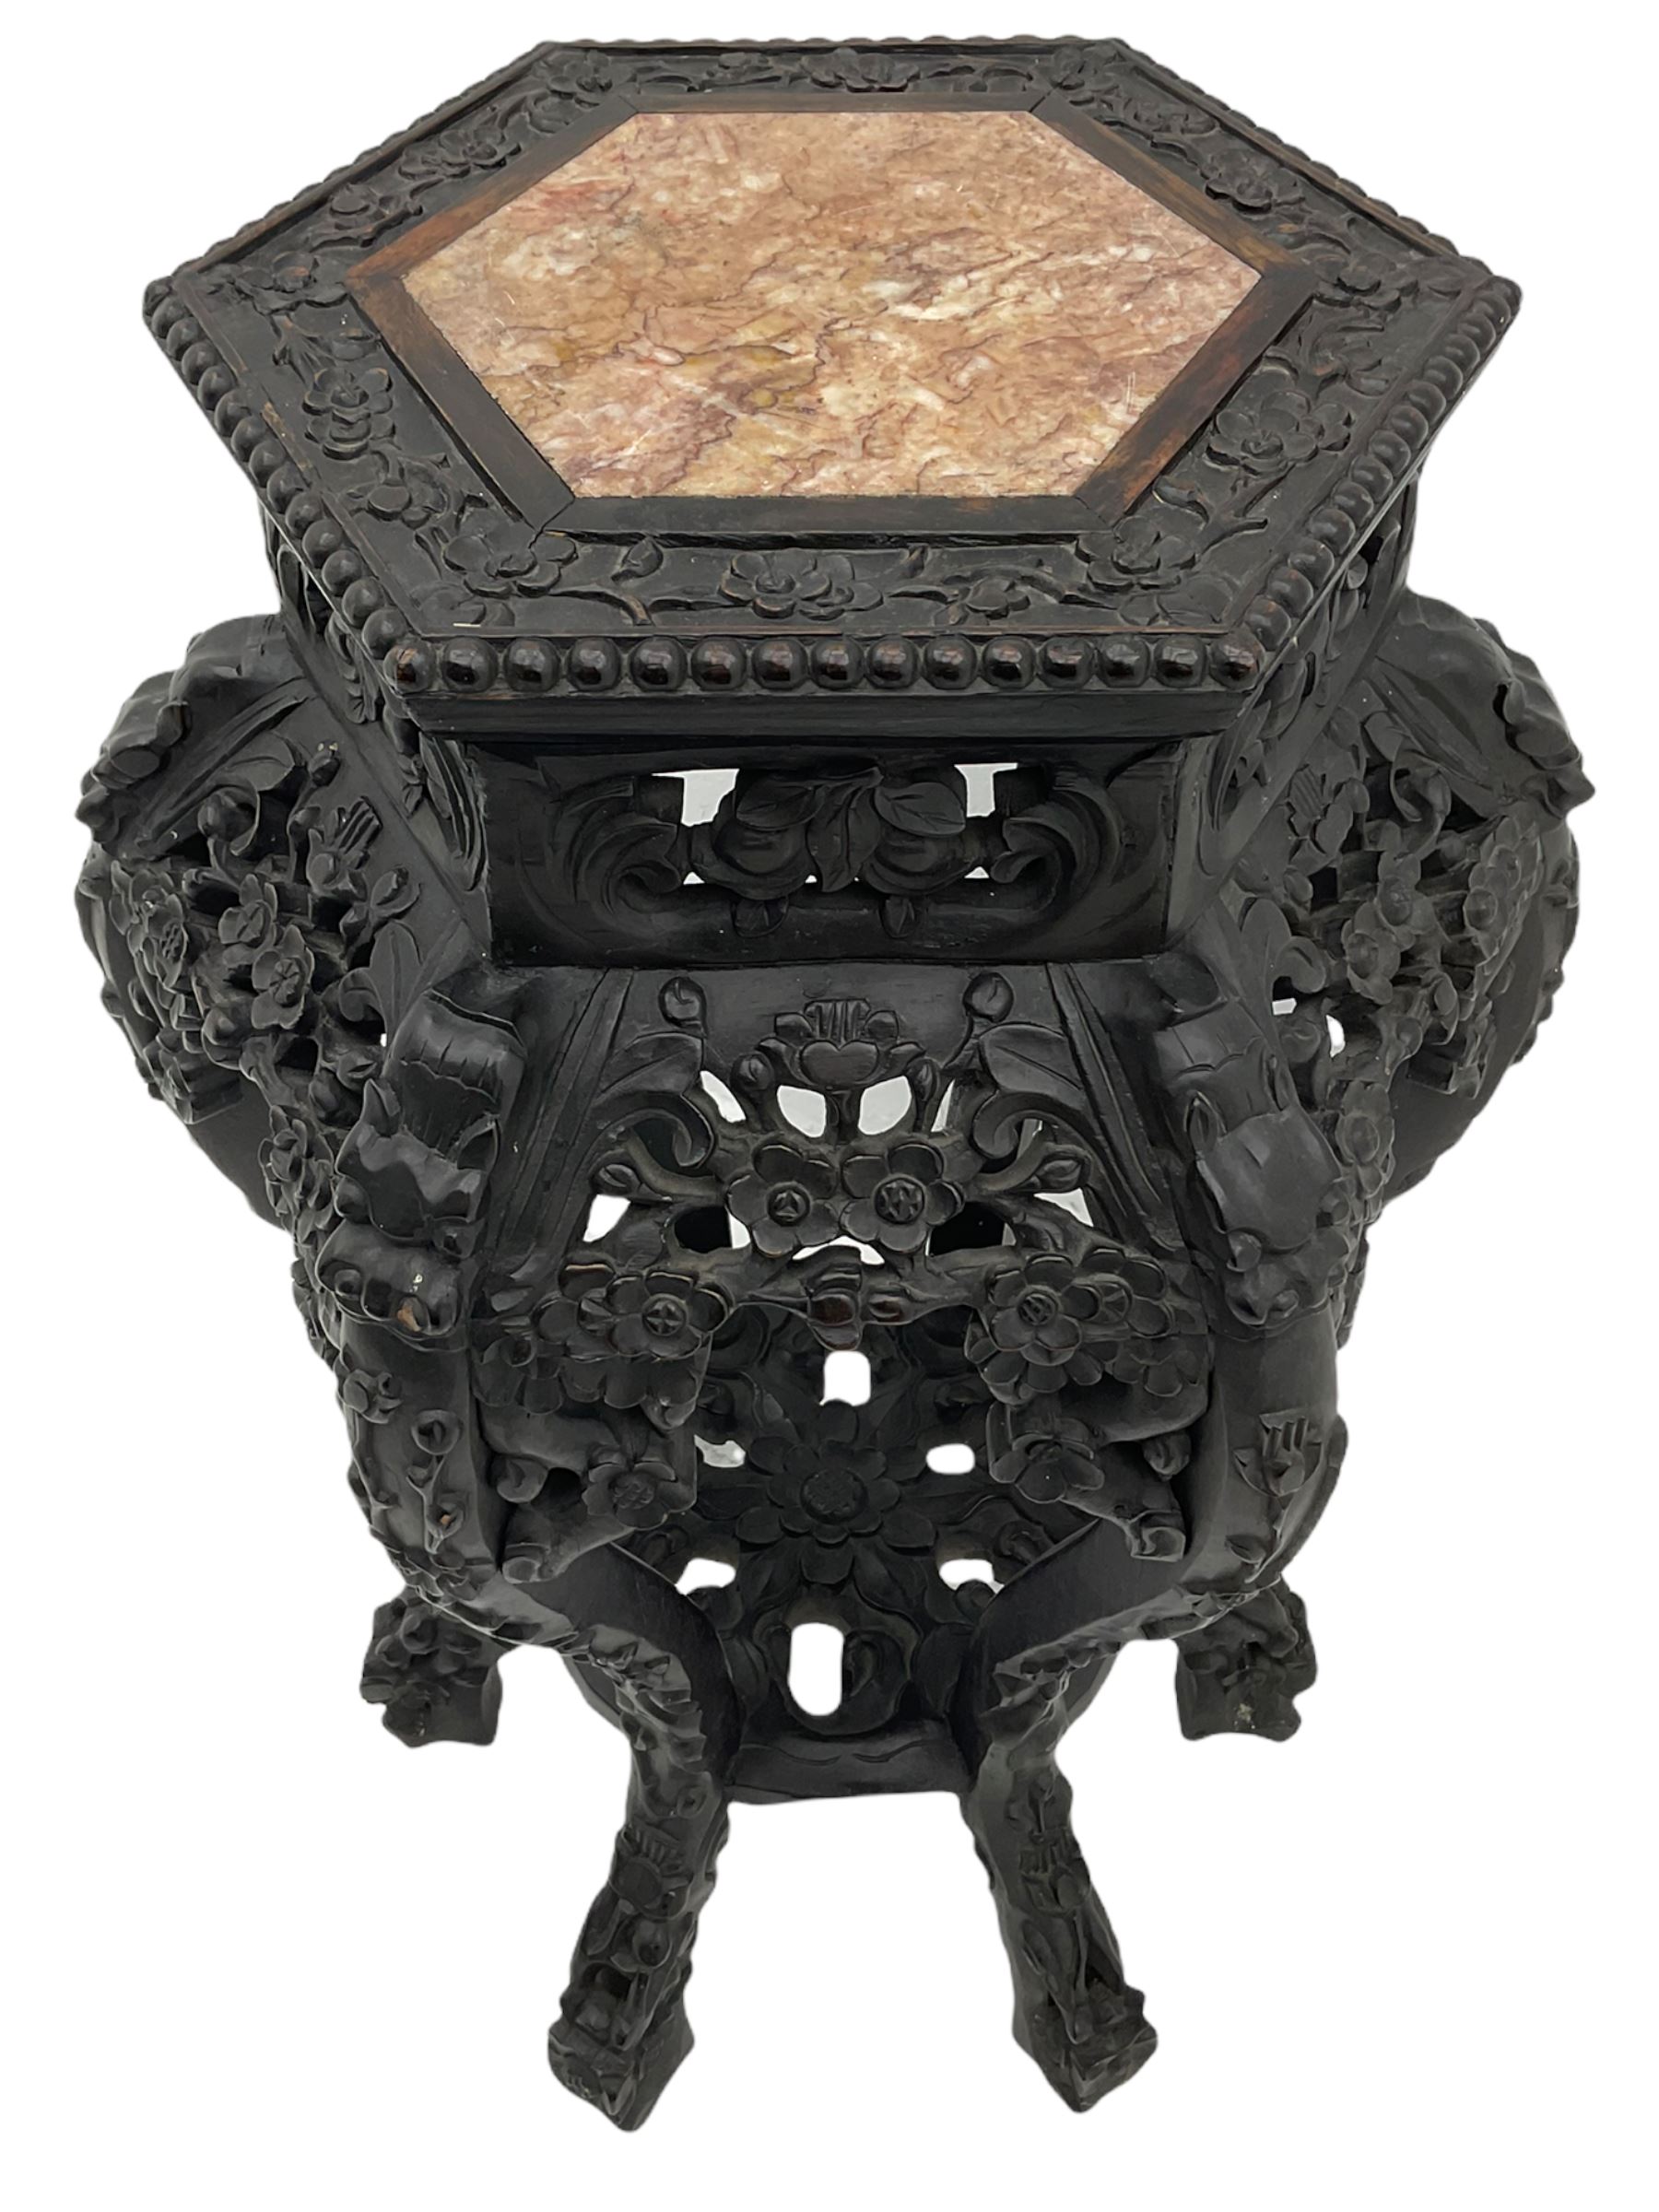 Chinese carved hardwood jardini�re stand - Image 4 of 8